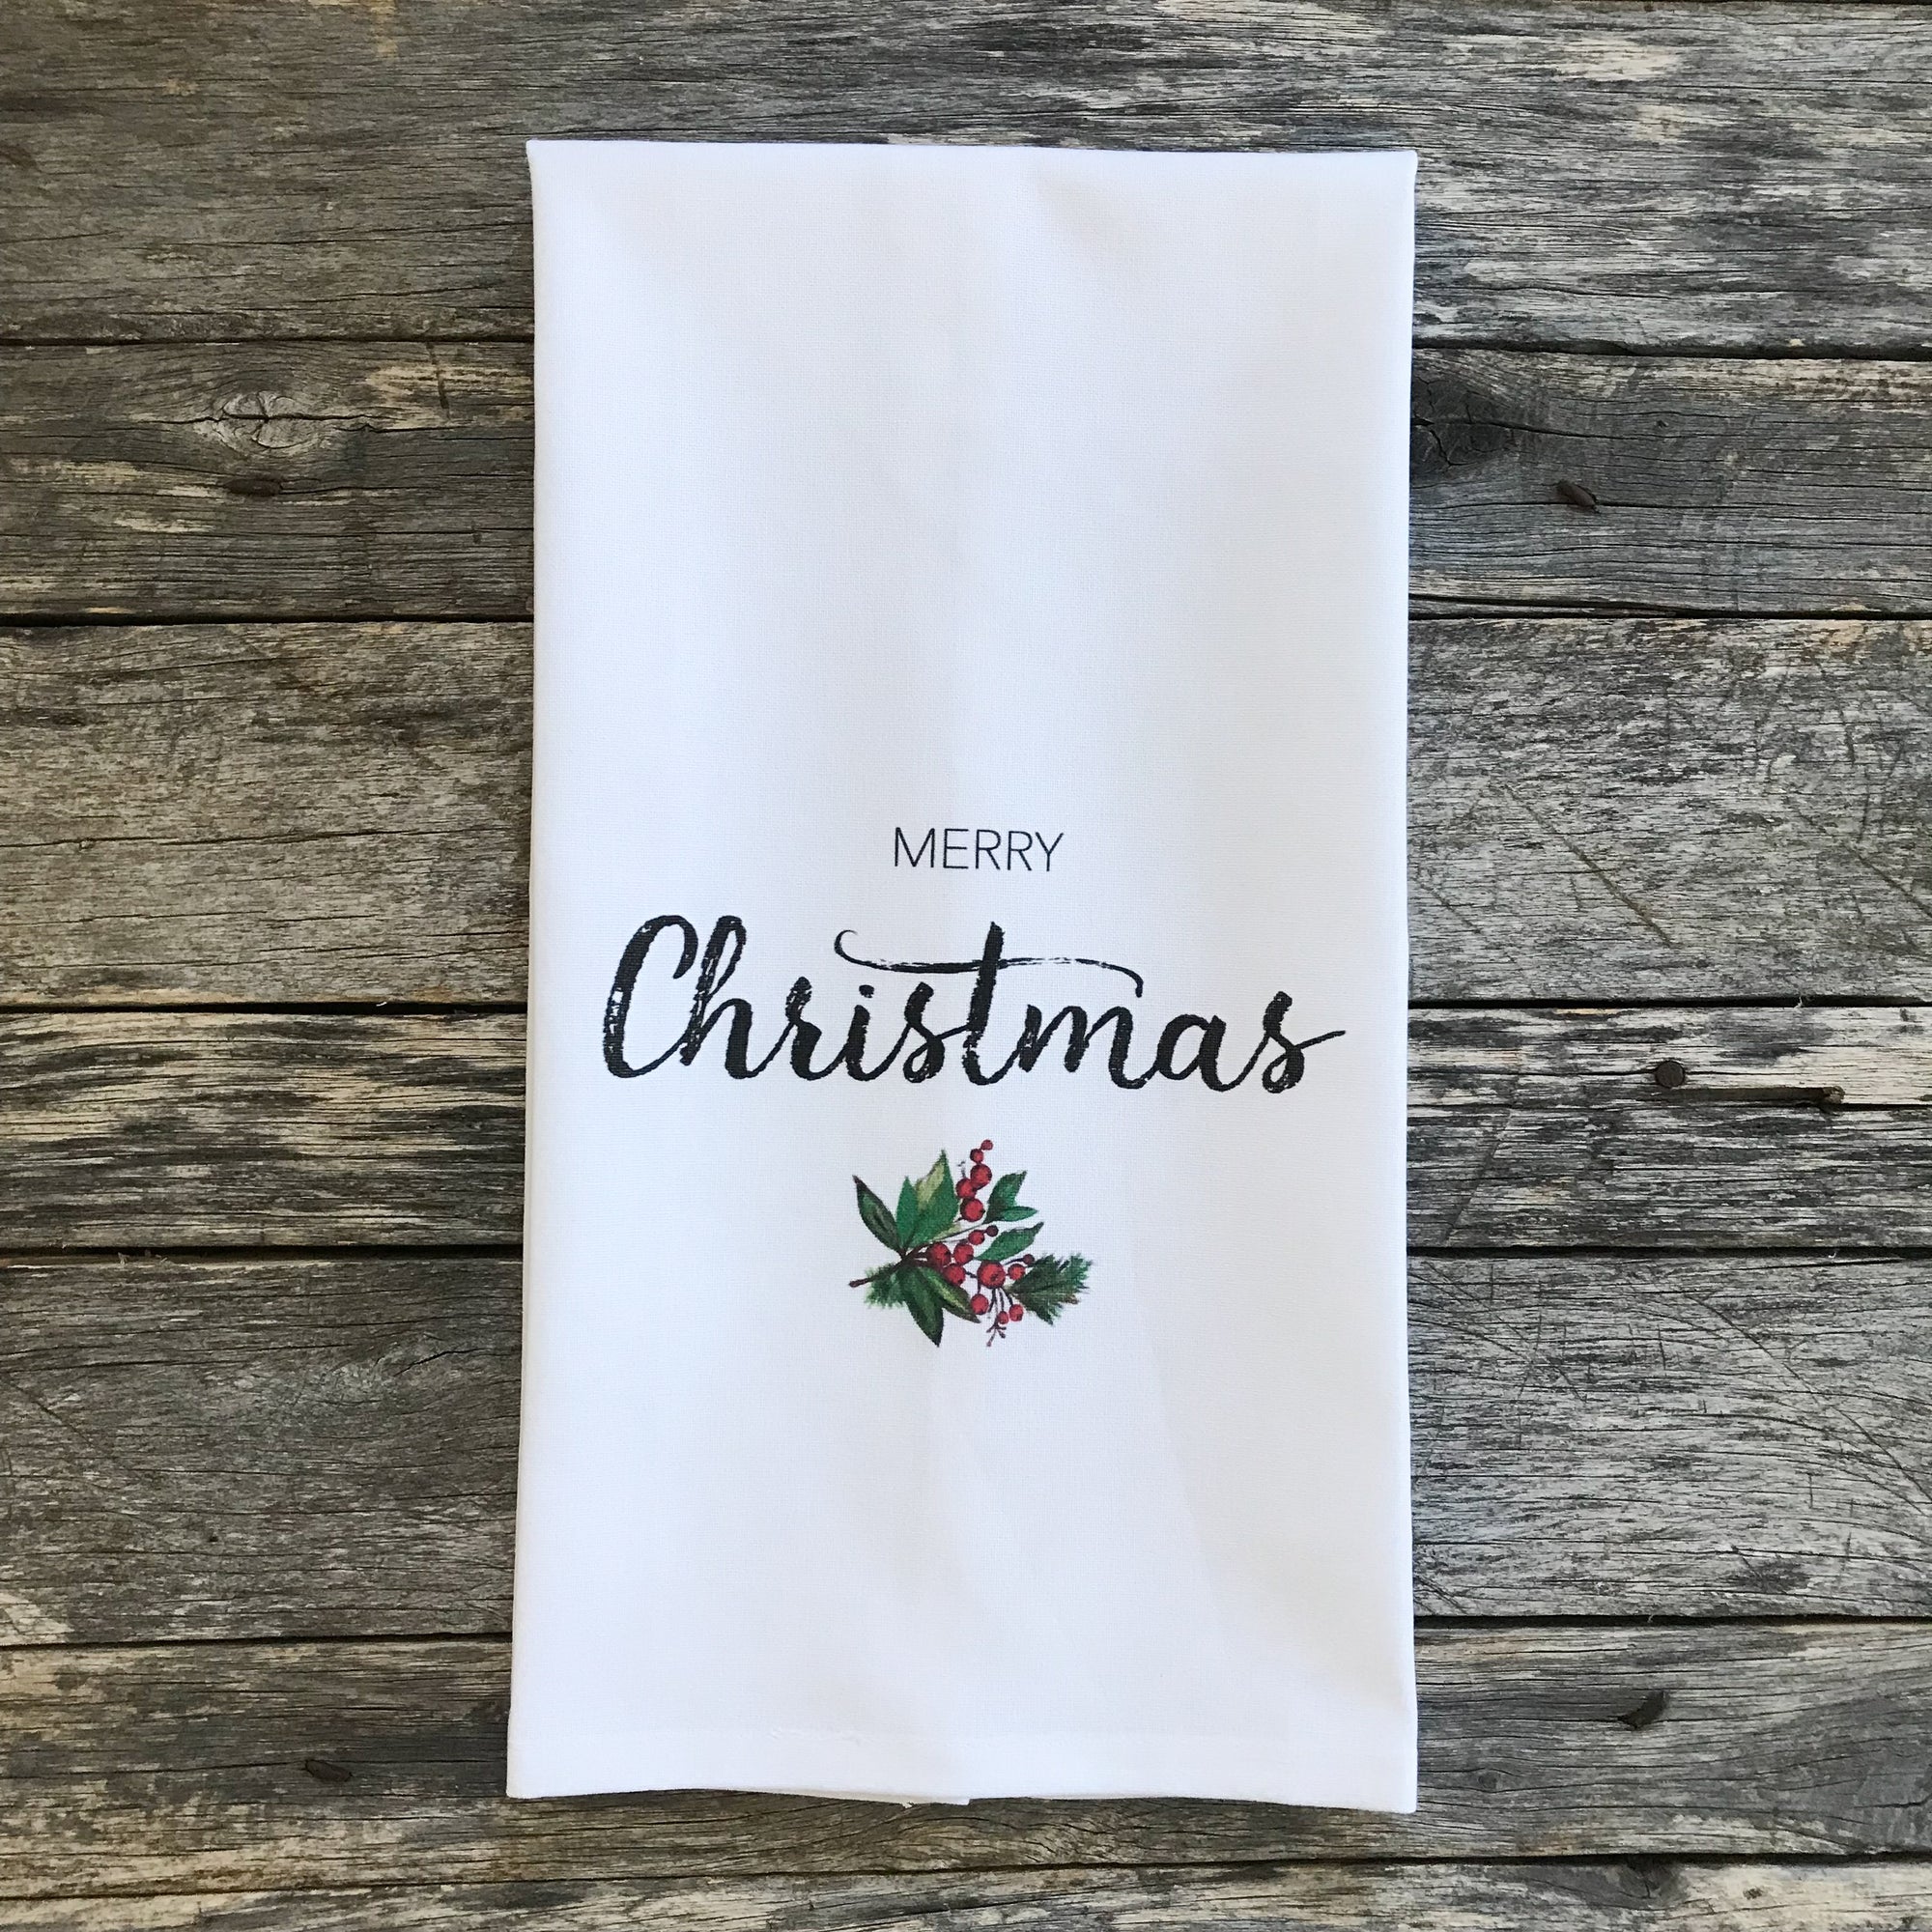 Merry Christmas Holly Sprig Tea Towel - Linen and Ivory